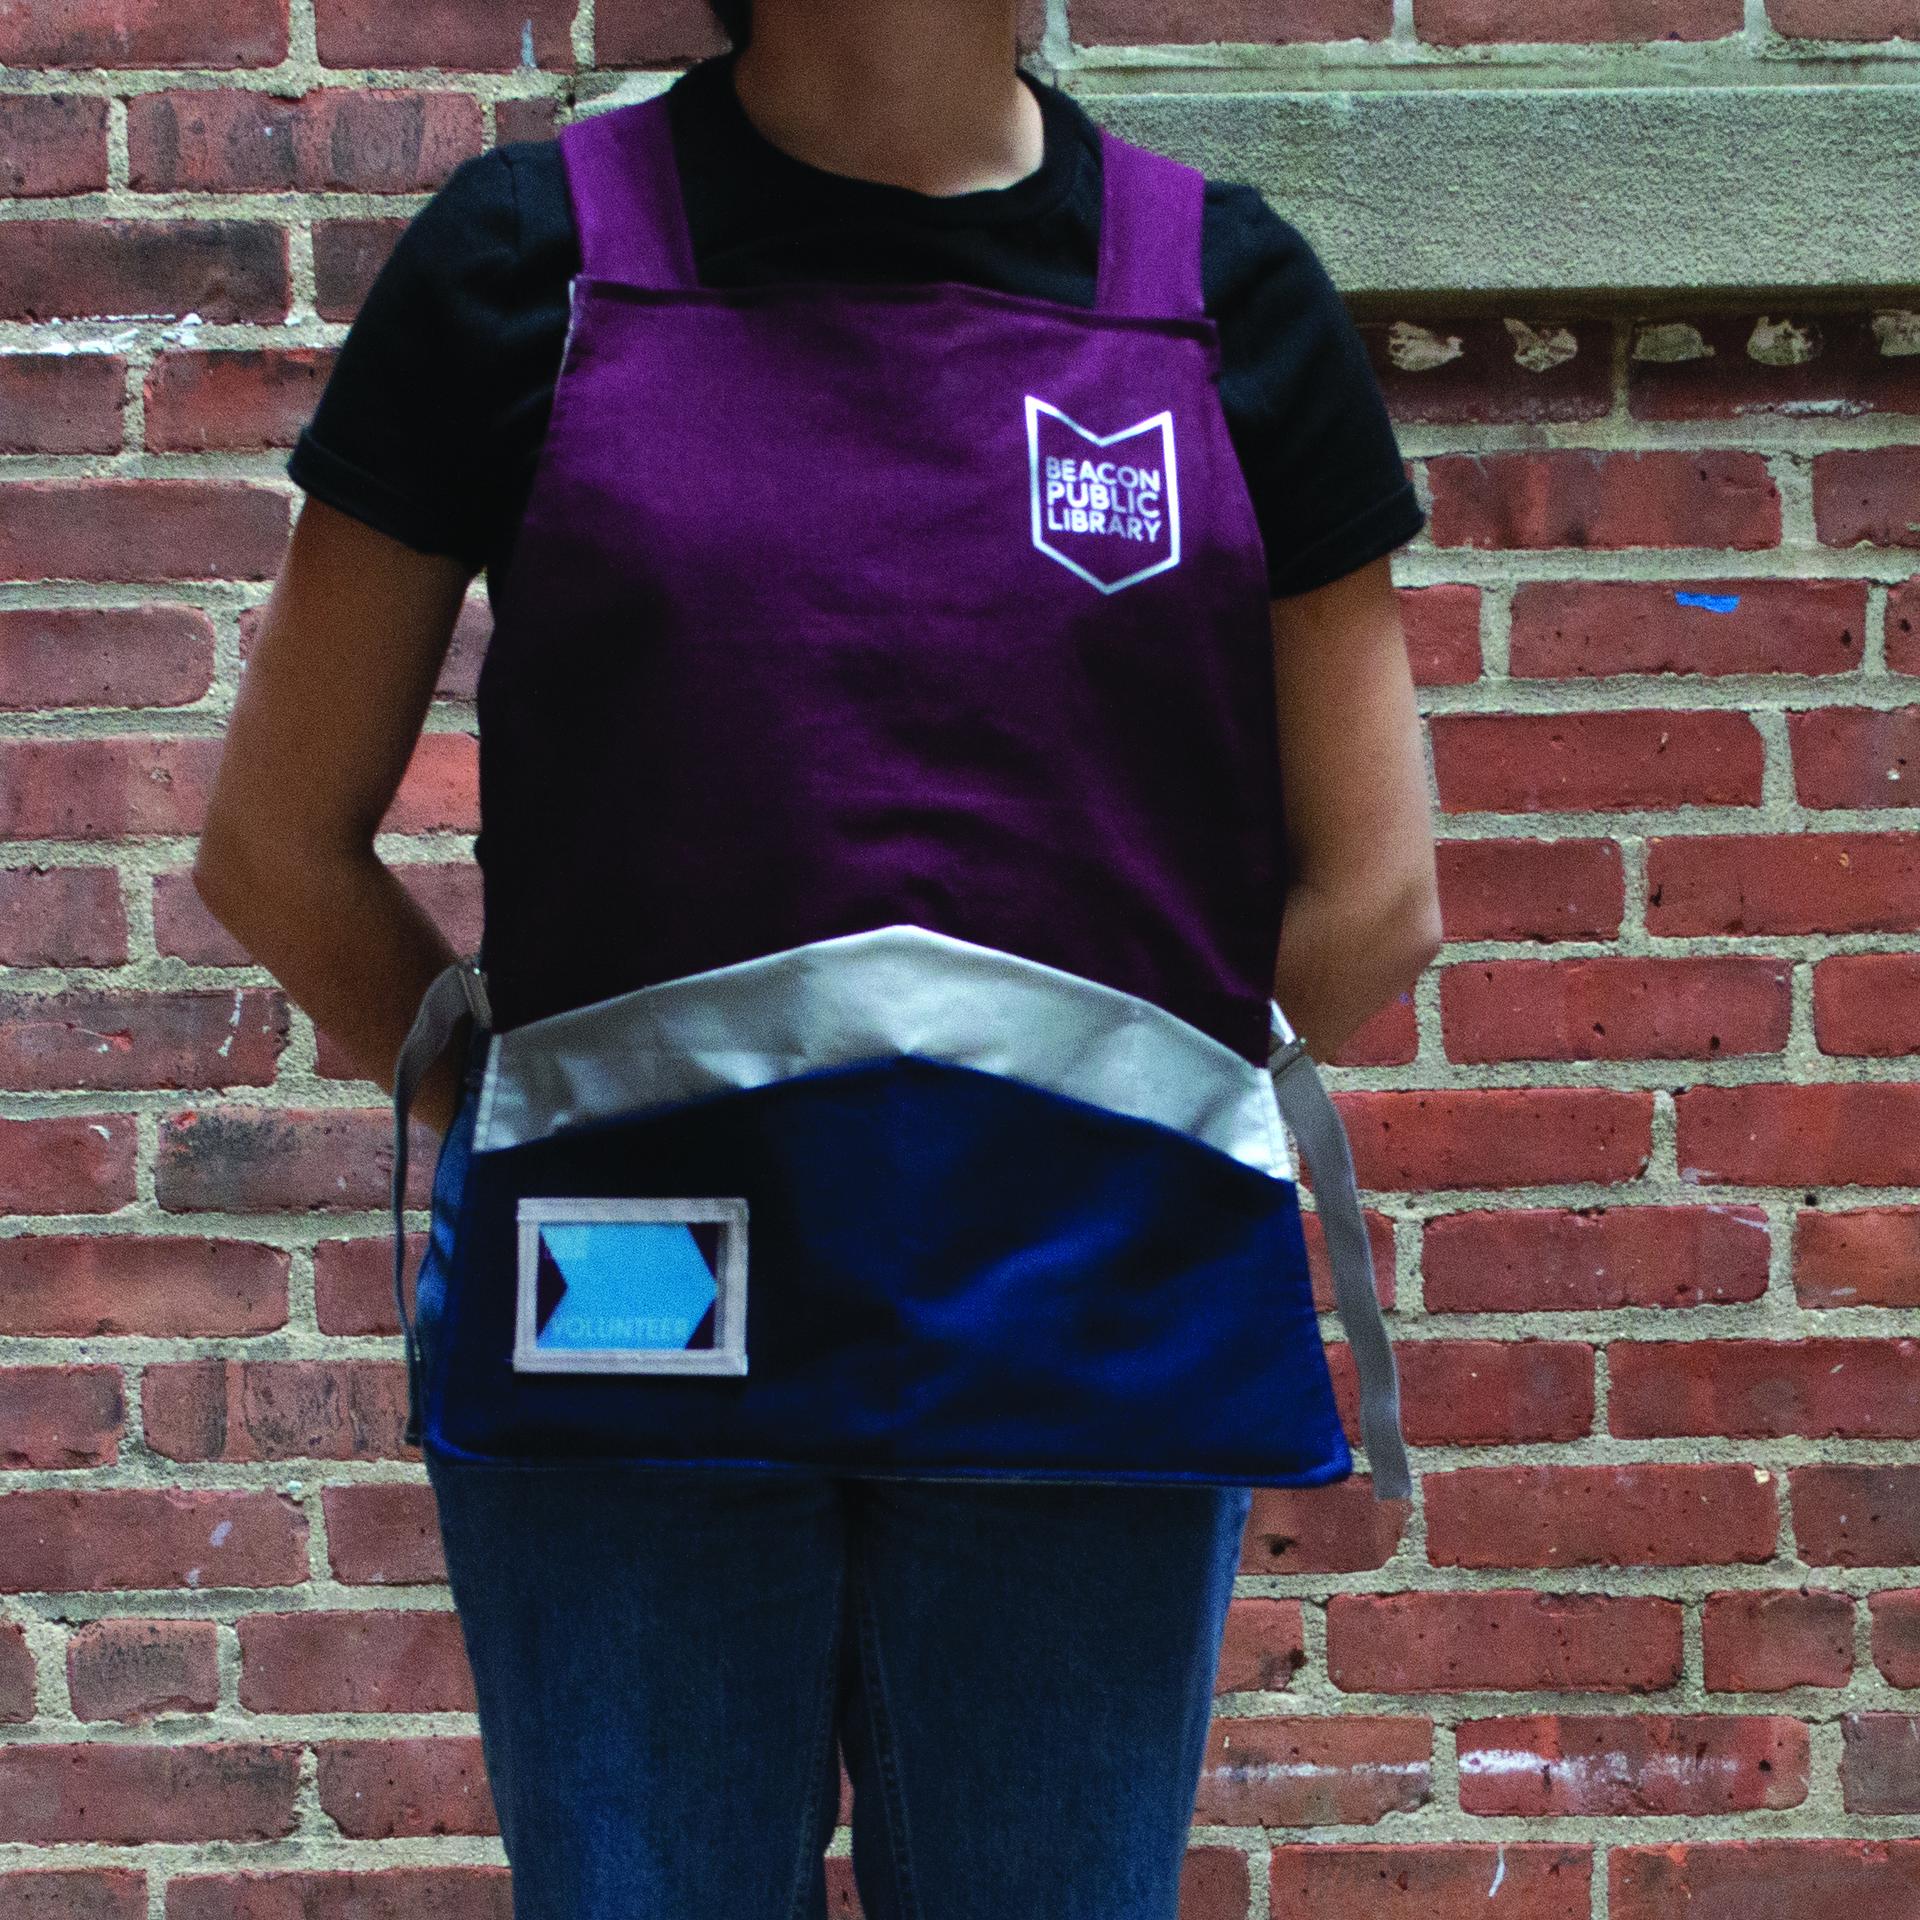 Wearing the library apron